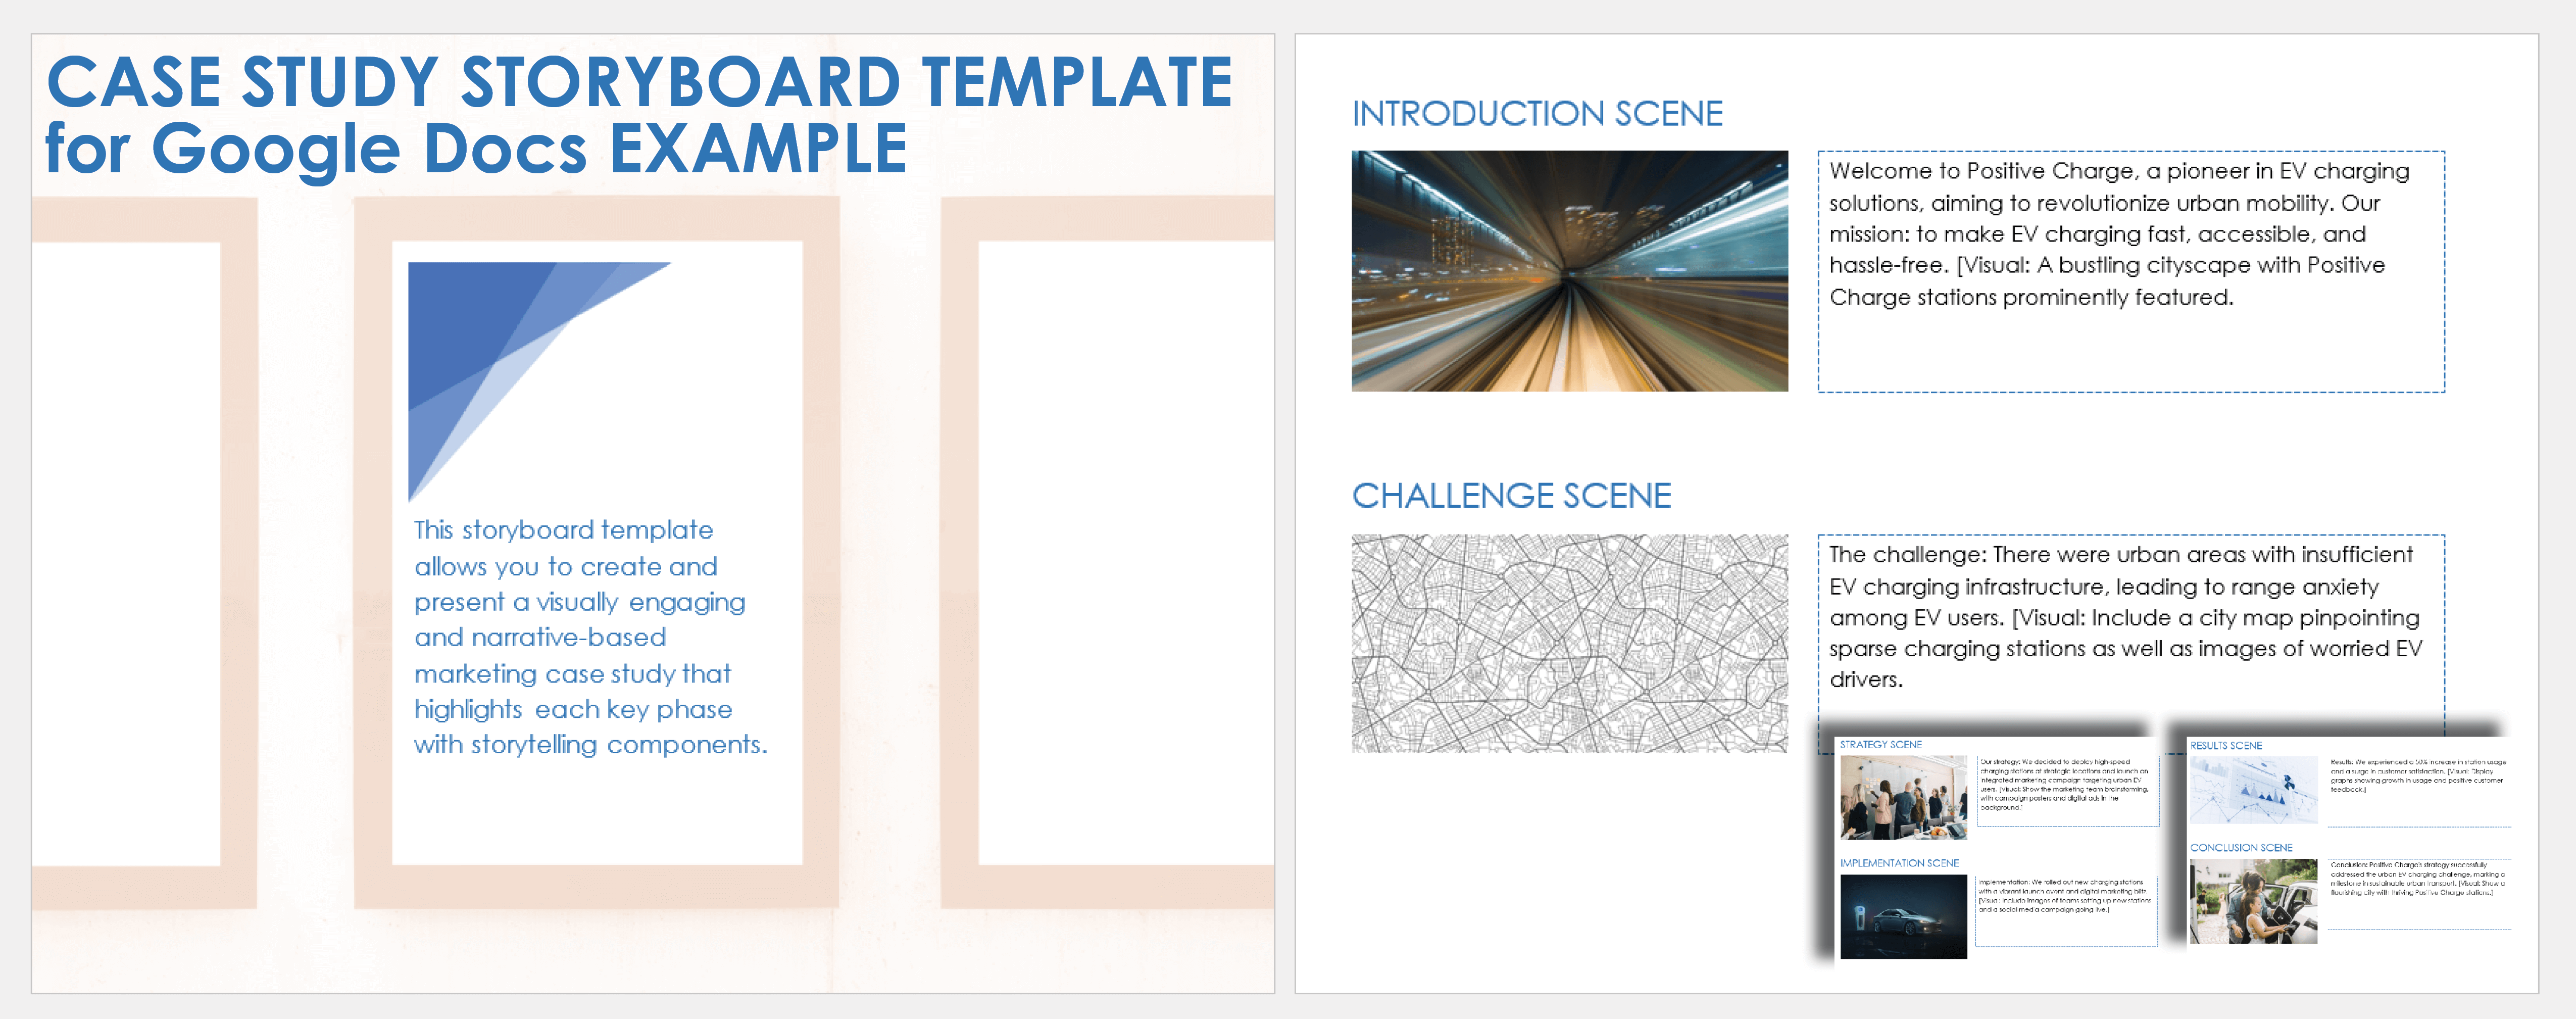 Case Study Storyboard Example Template Google Docs